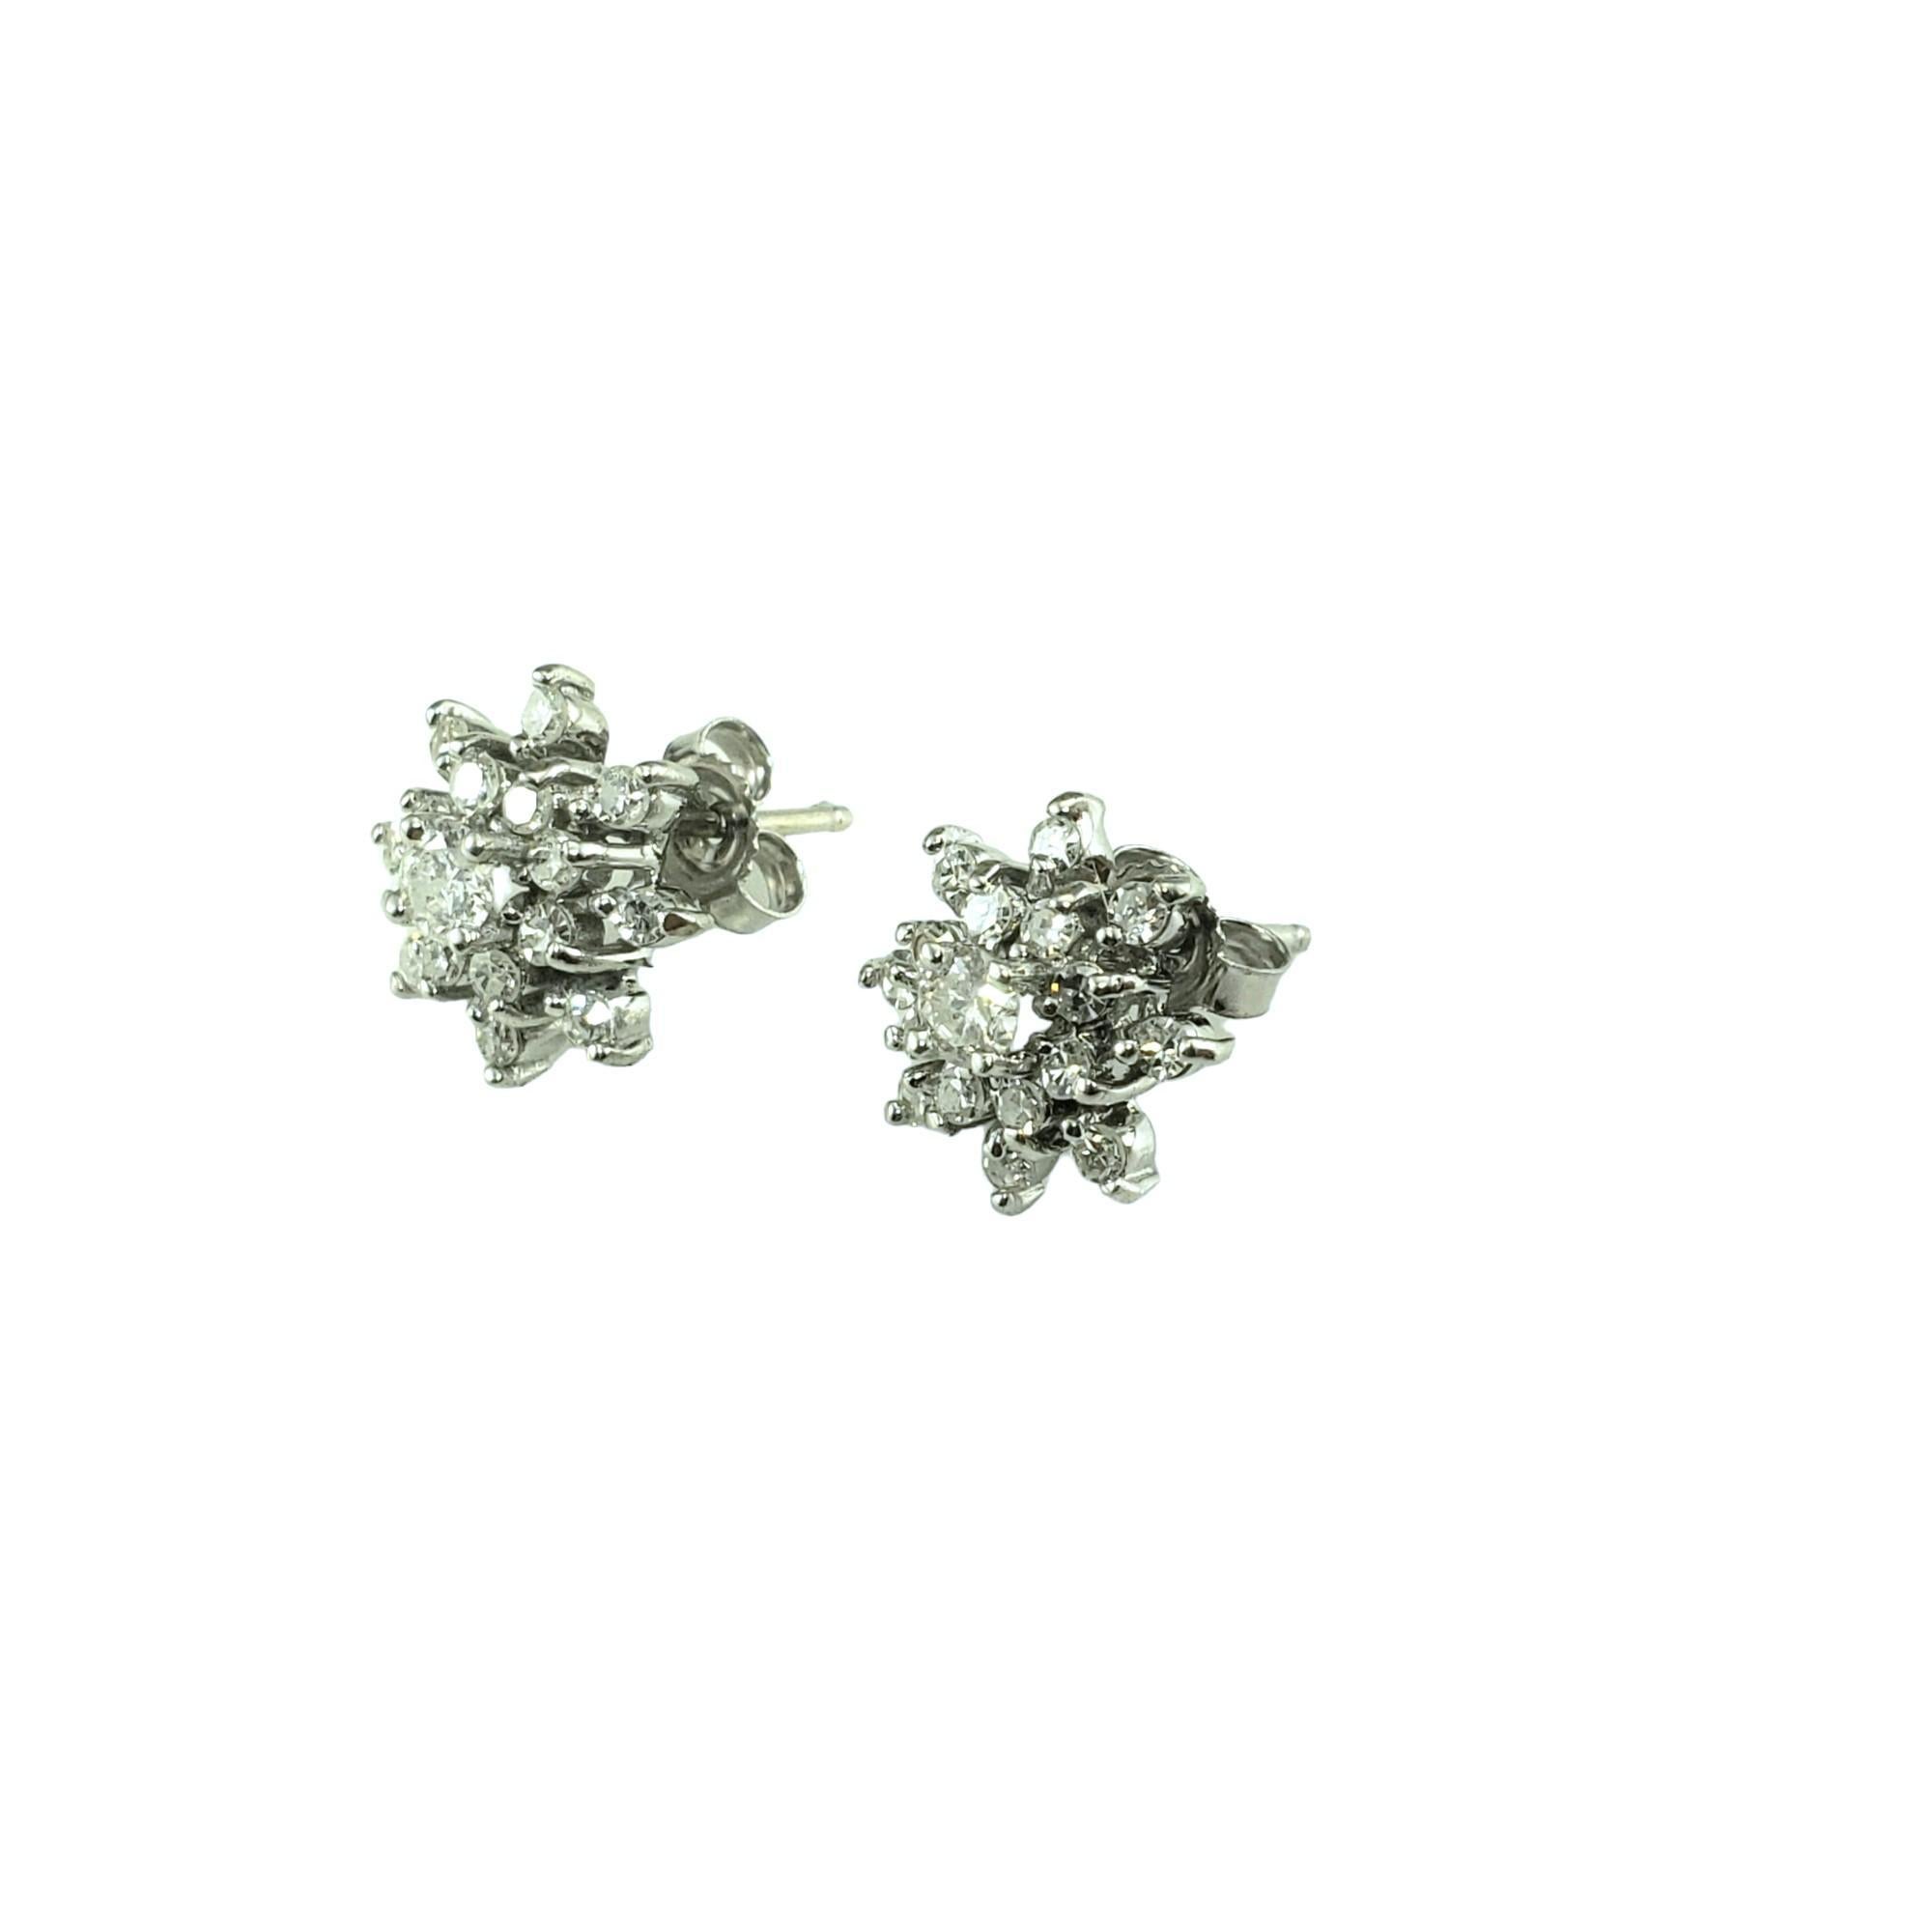 10 Karat White Gold Diamond Cluster Earrings #16239 In Good Condition For Sale In Washington Depot, CT